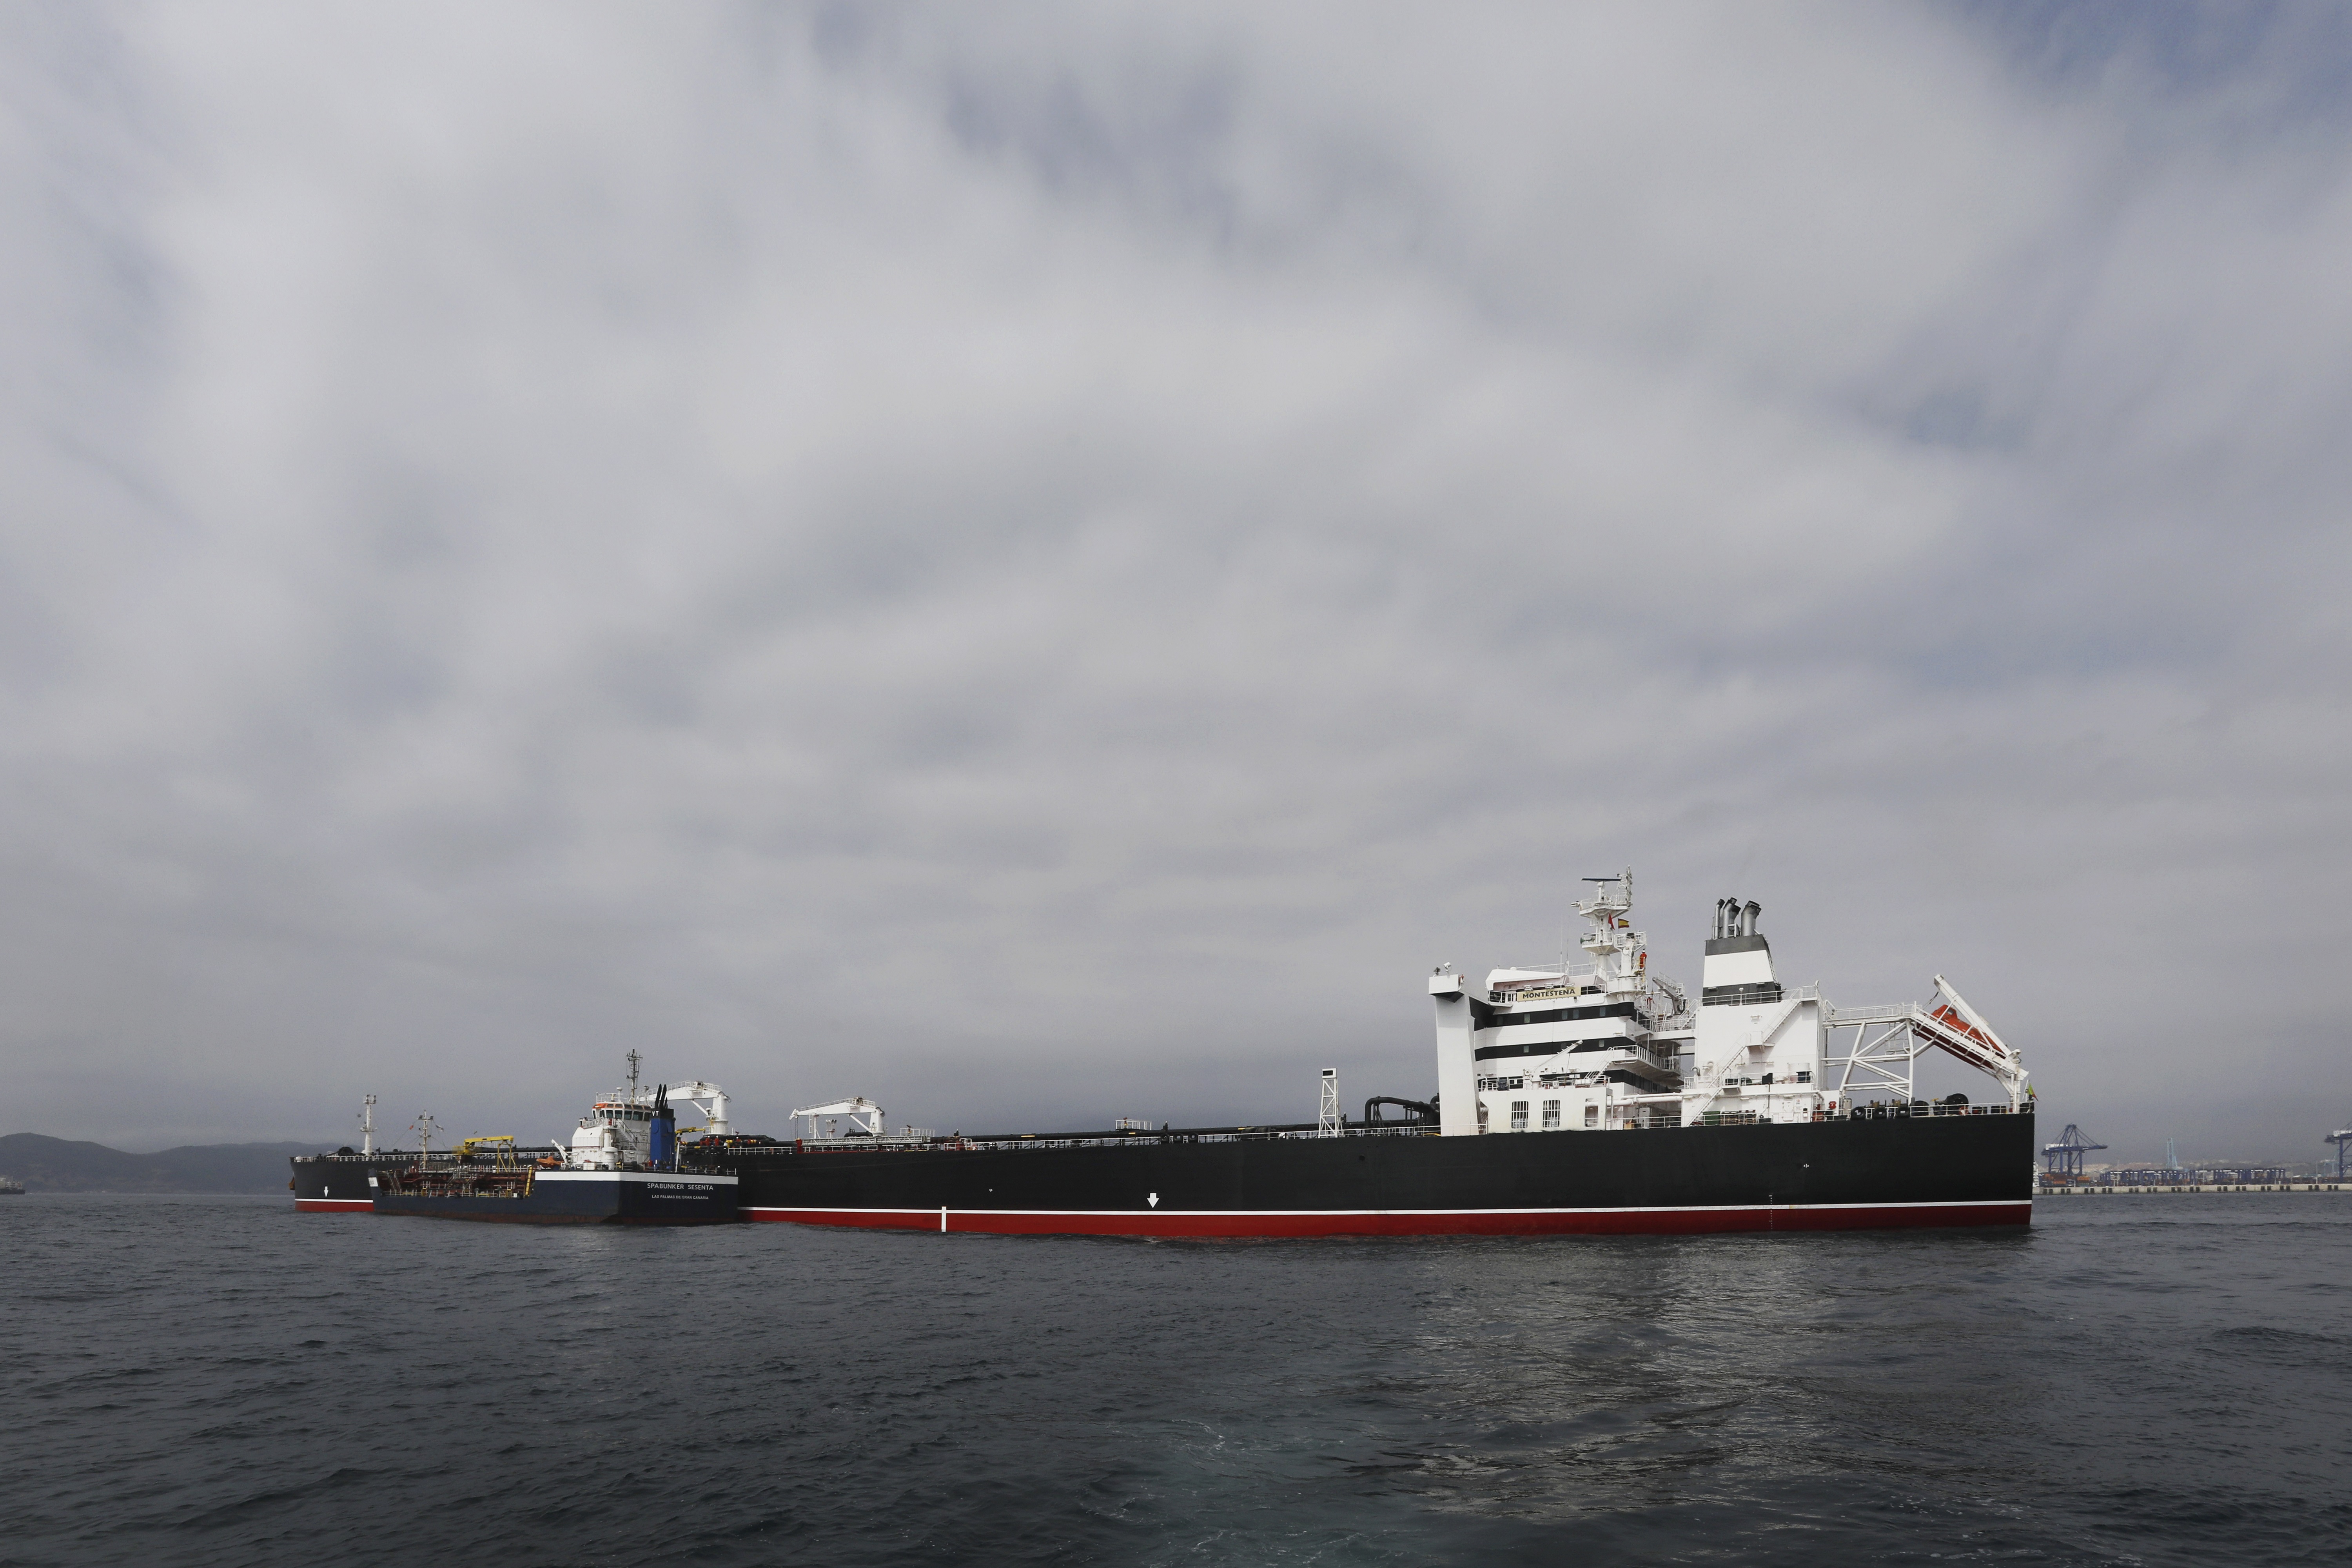 CEPSA Completes Advanced Biofuels Shipping Trial For The First Time In Spain